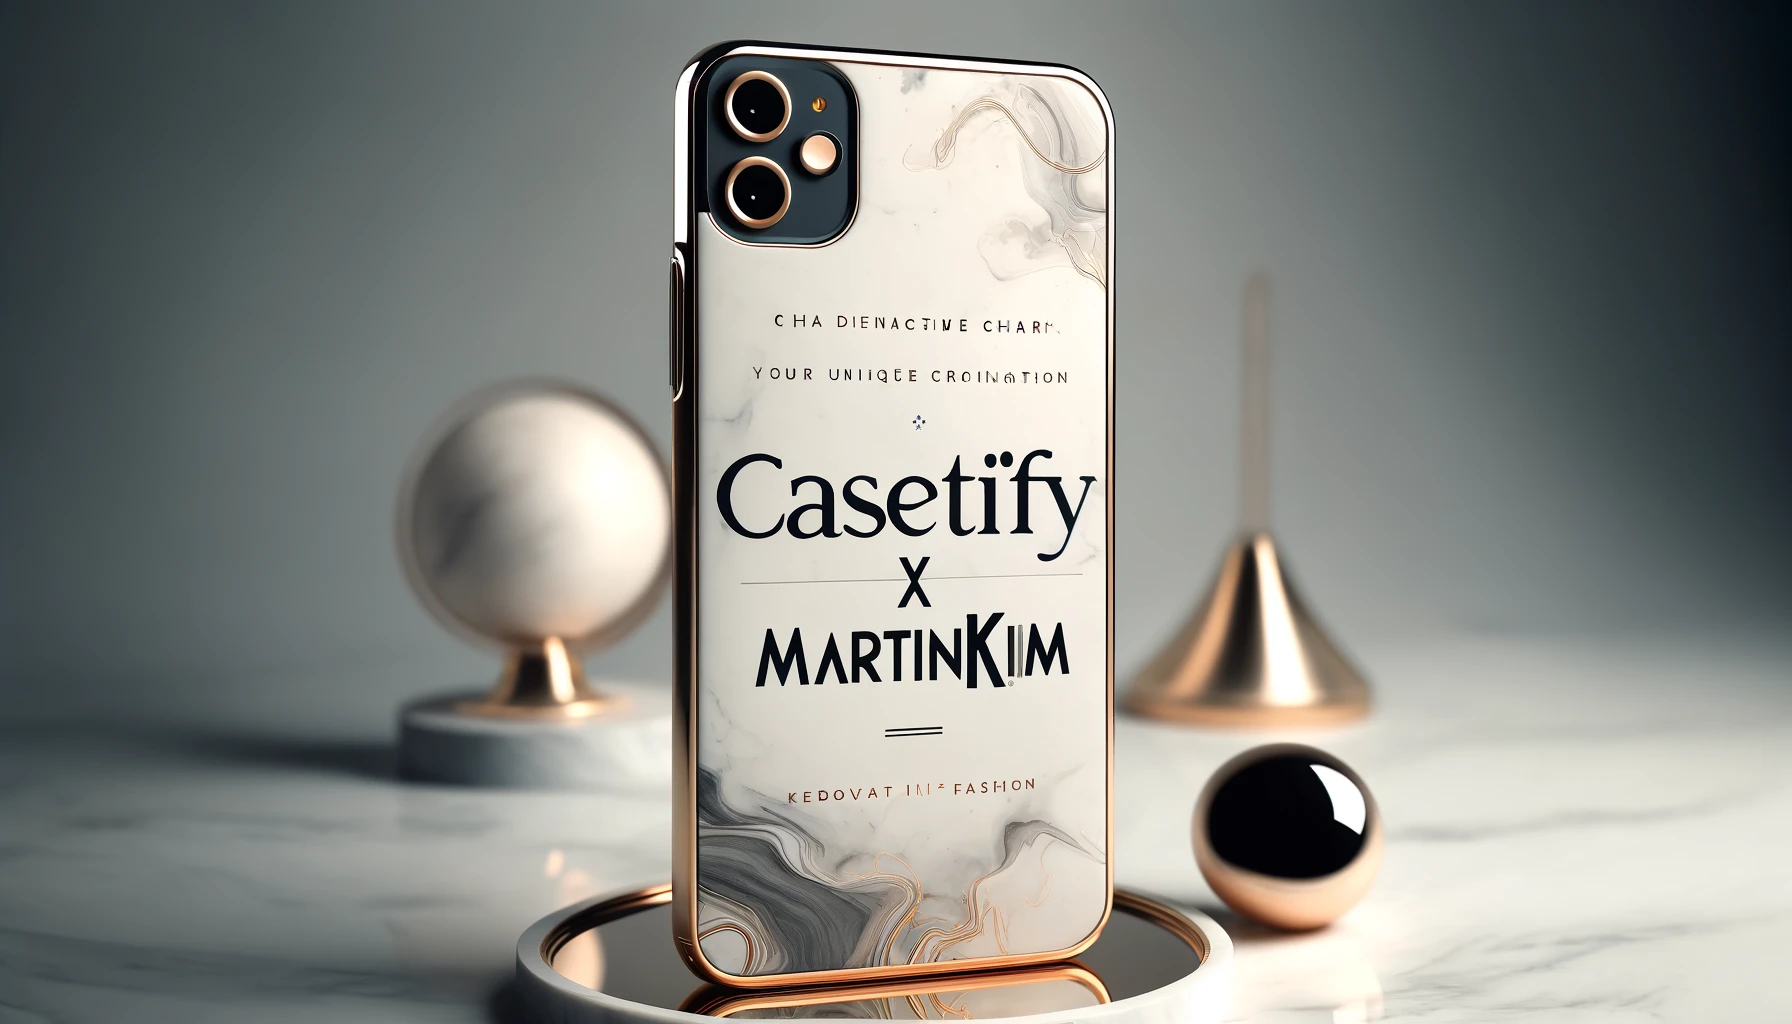 A stylish advertisement showcasing the collaboration between CASETiFY and Martin Kim. Highlight the unique charm and appeal of their partnership. Include the text 'CASETiFY x MartinKim'. The design should be sleek and modern, with a luxurious touch, emphasizing innovation and fashion. The background should be elegant, possibly with abstract or minimalist elements, and the focus should be on the brand names.